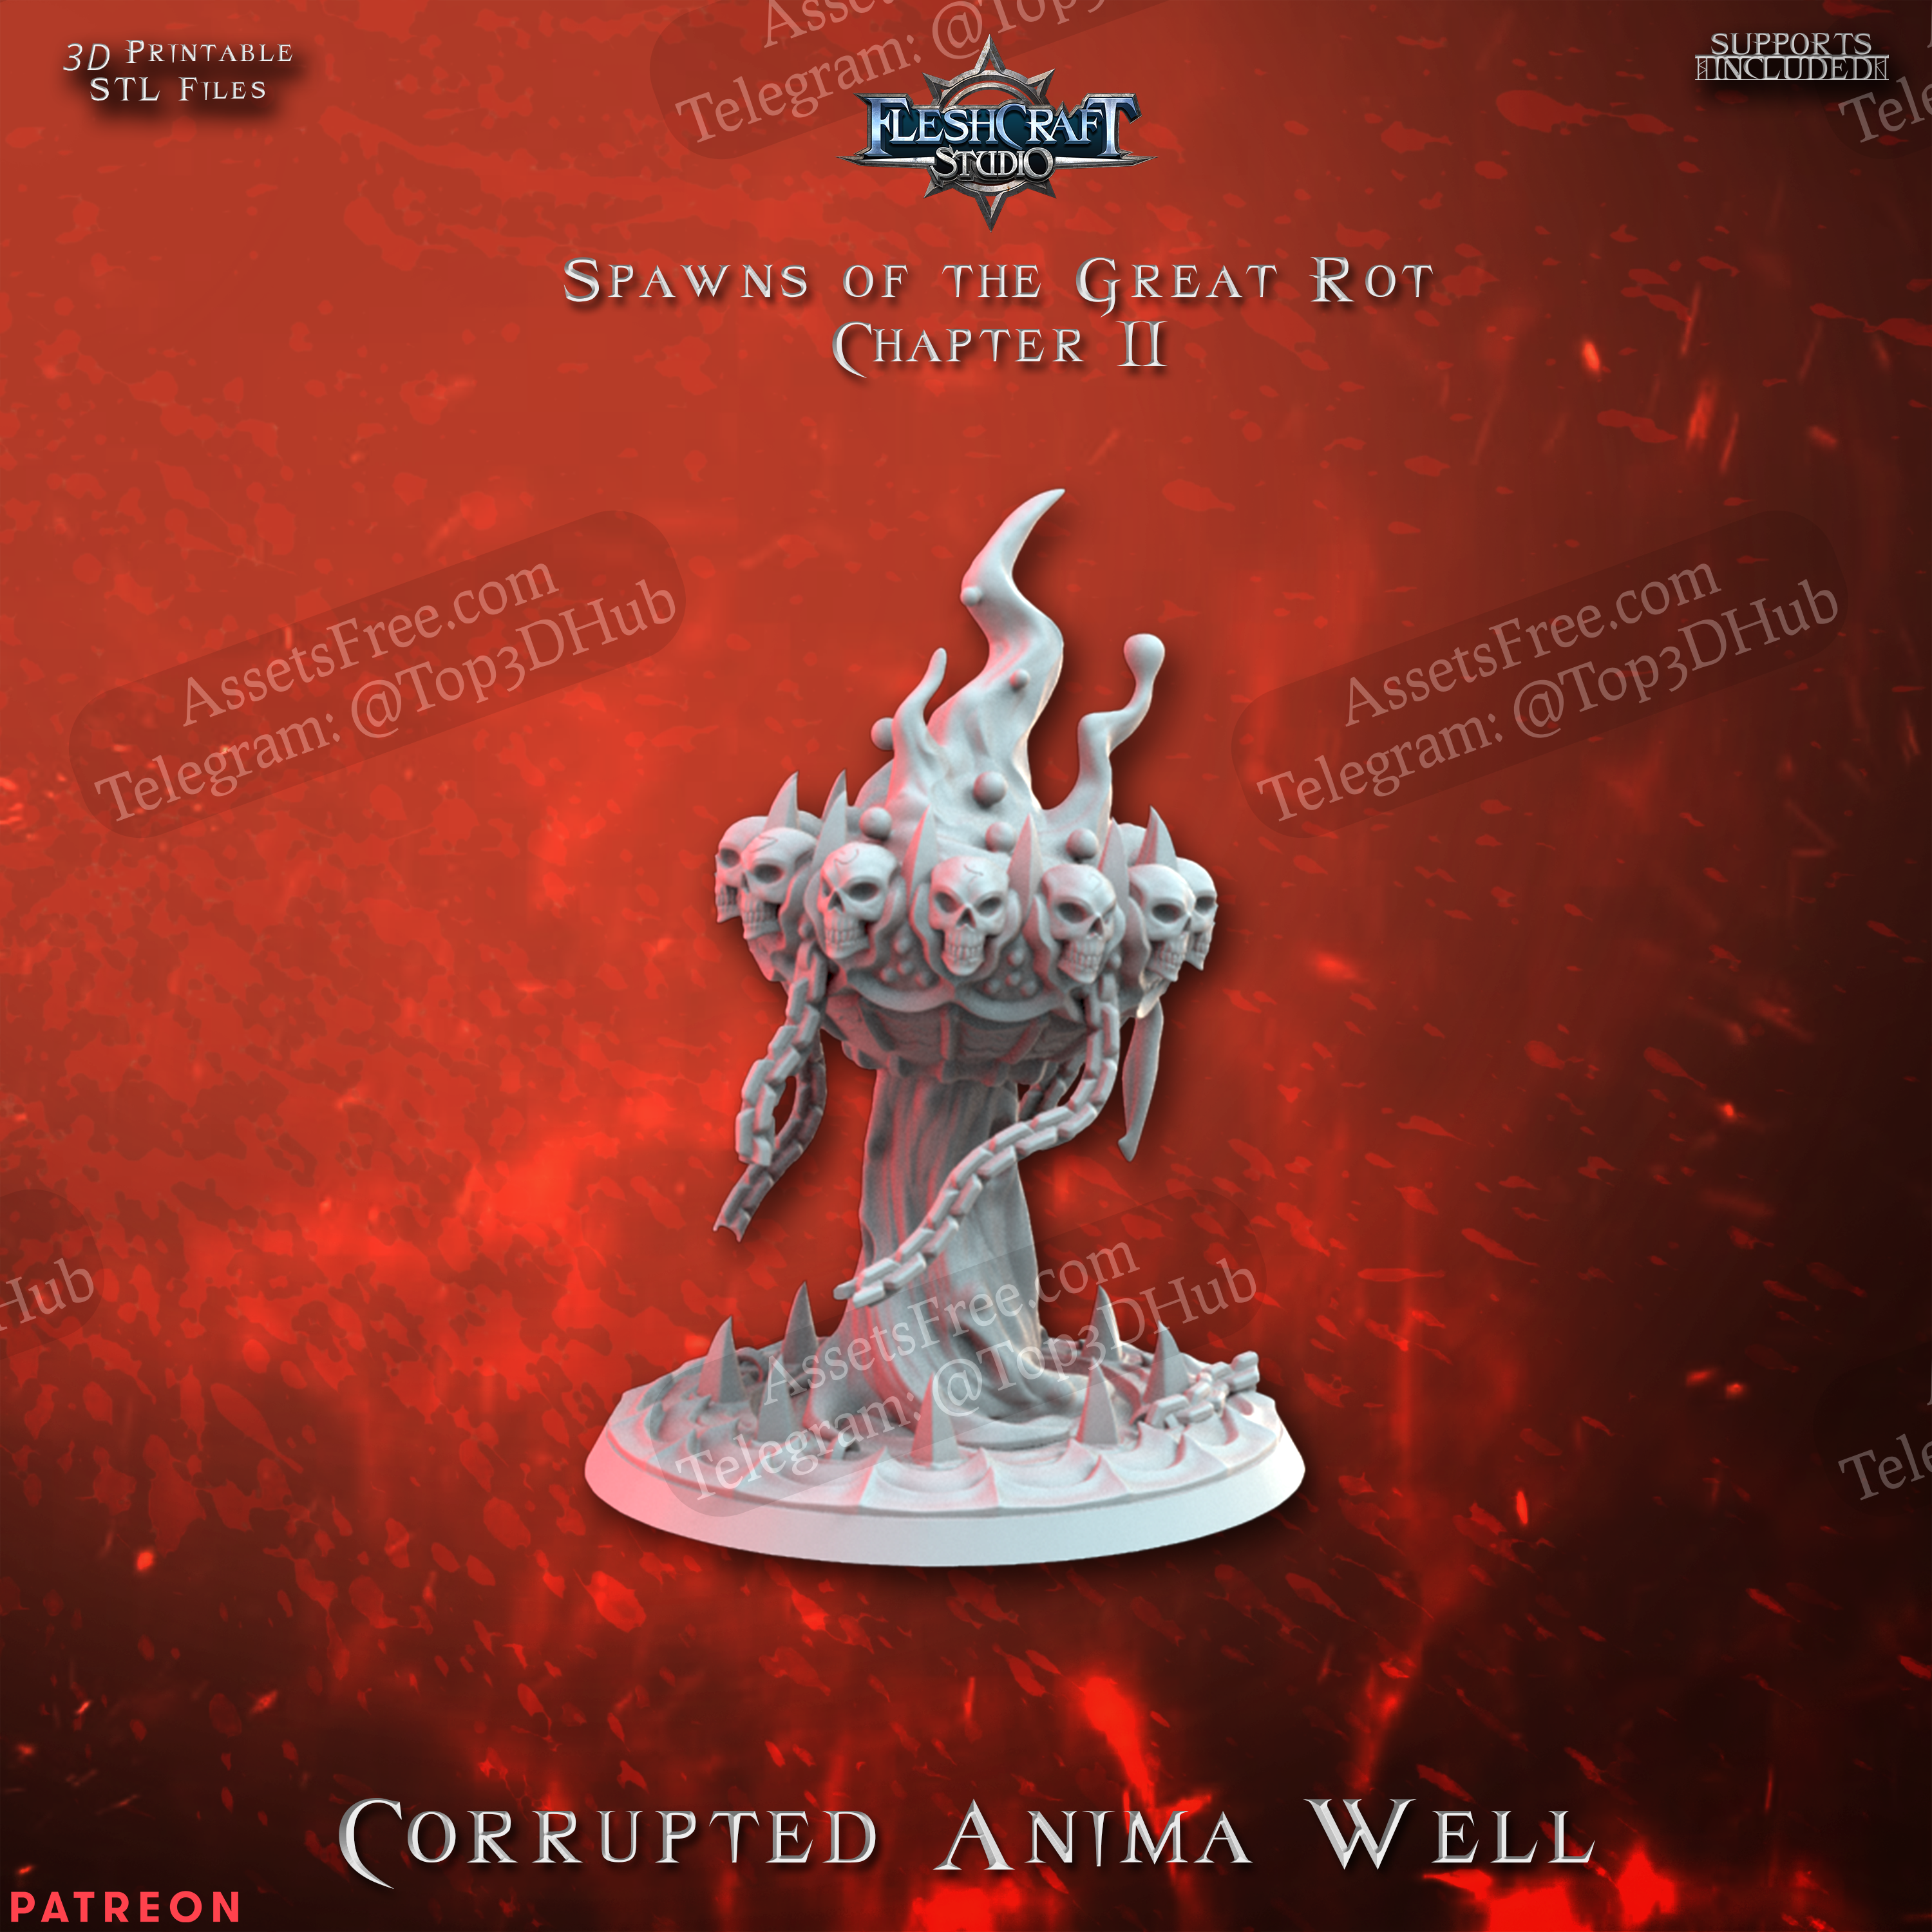 Corrupted Anima Well